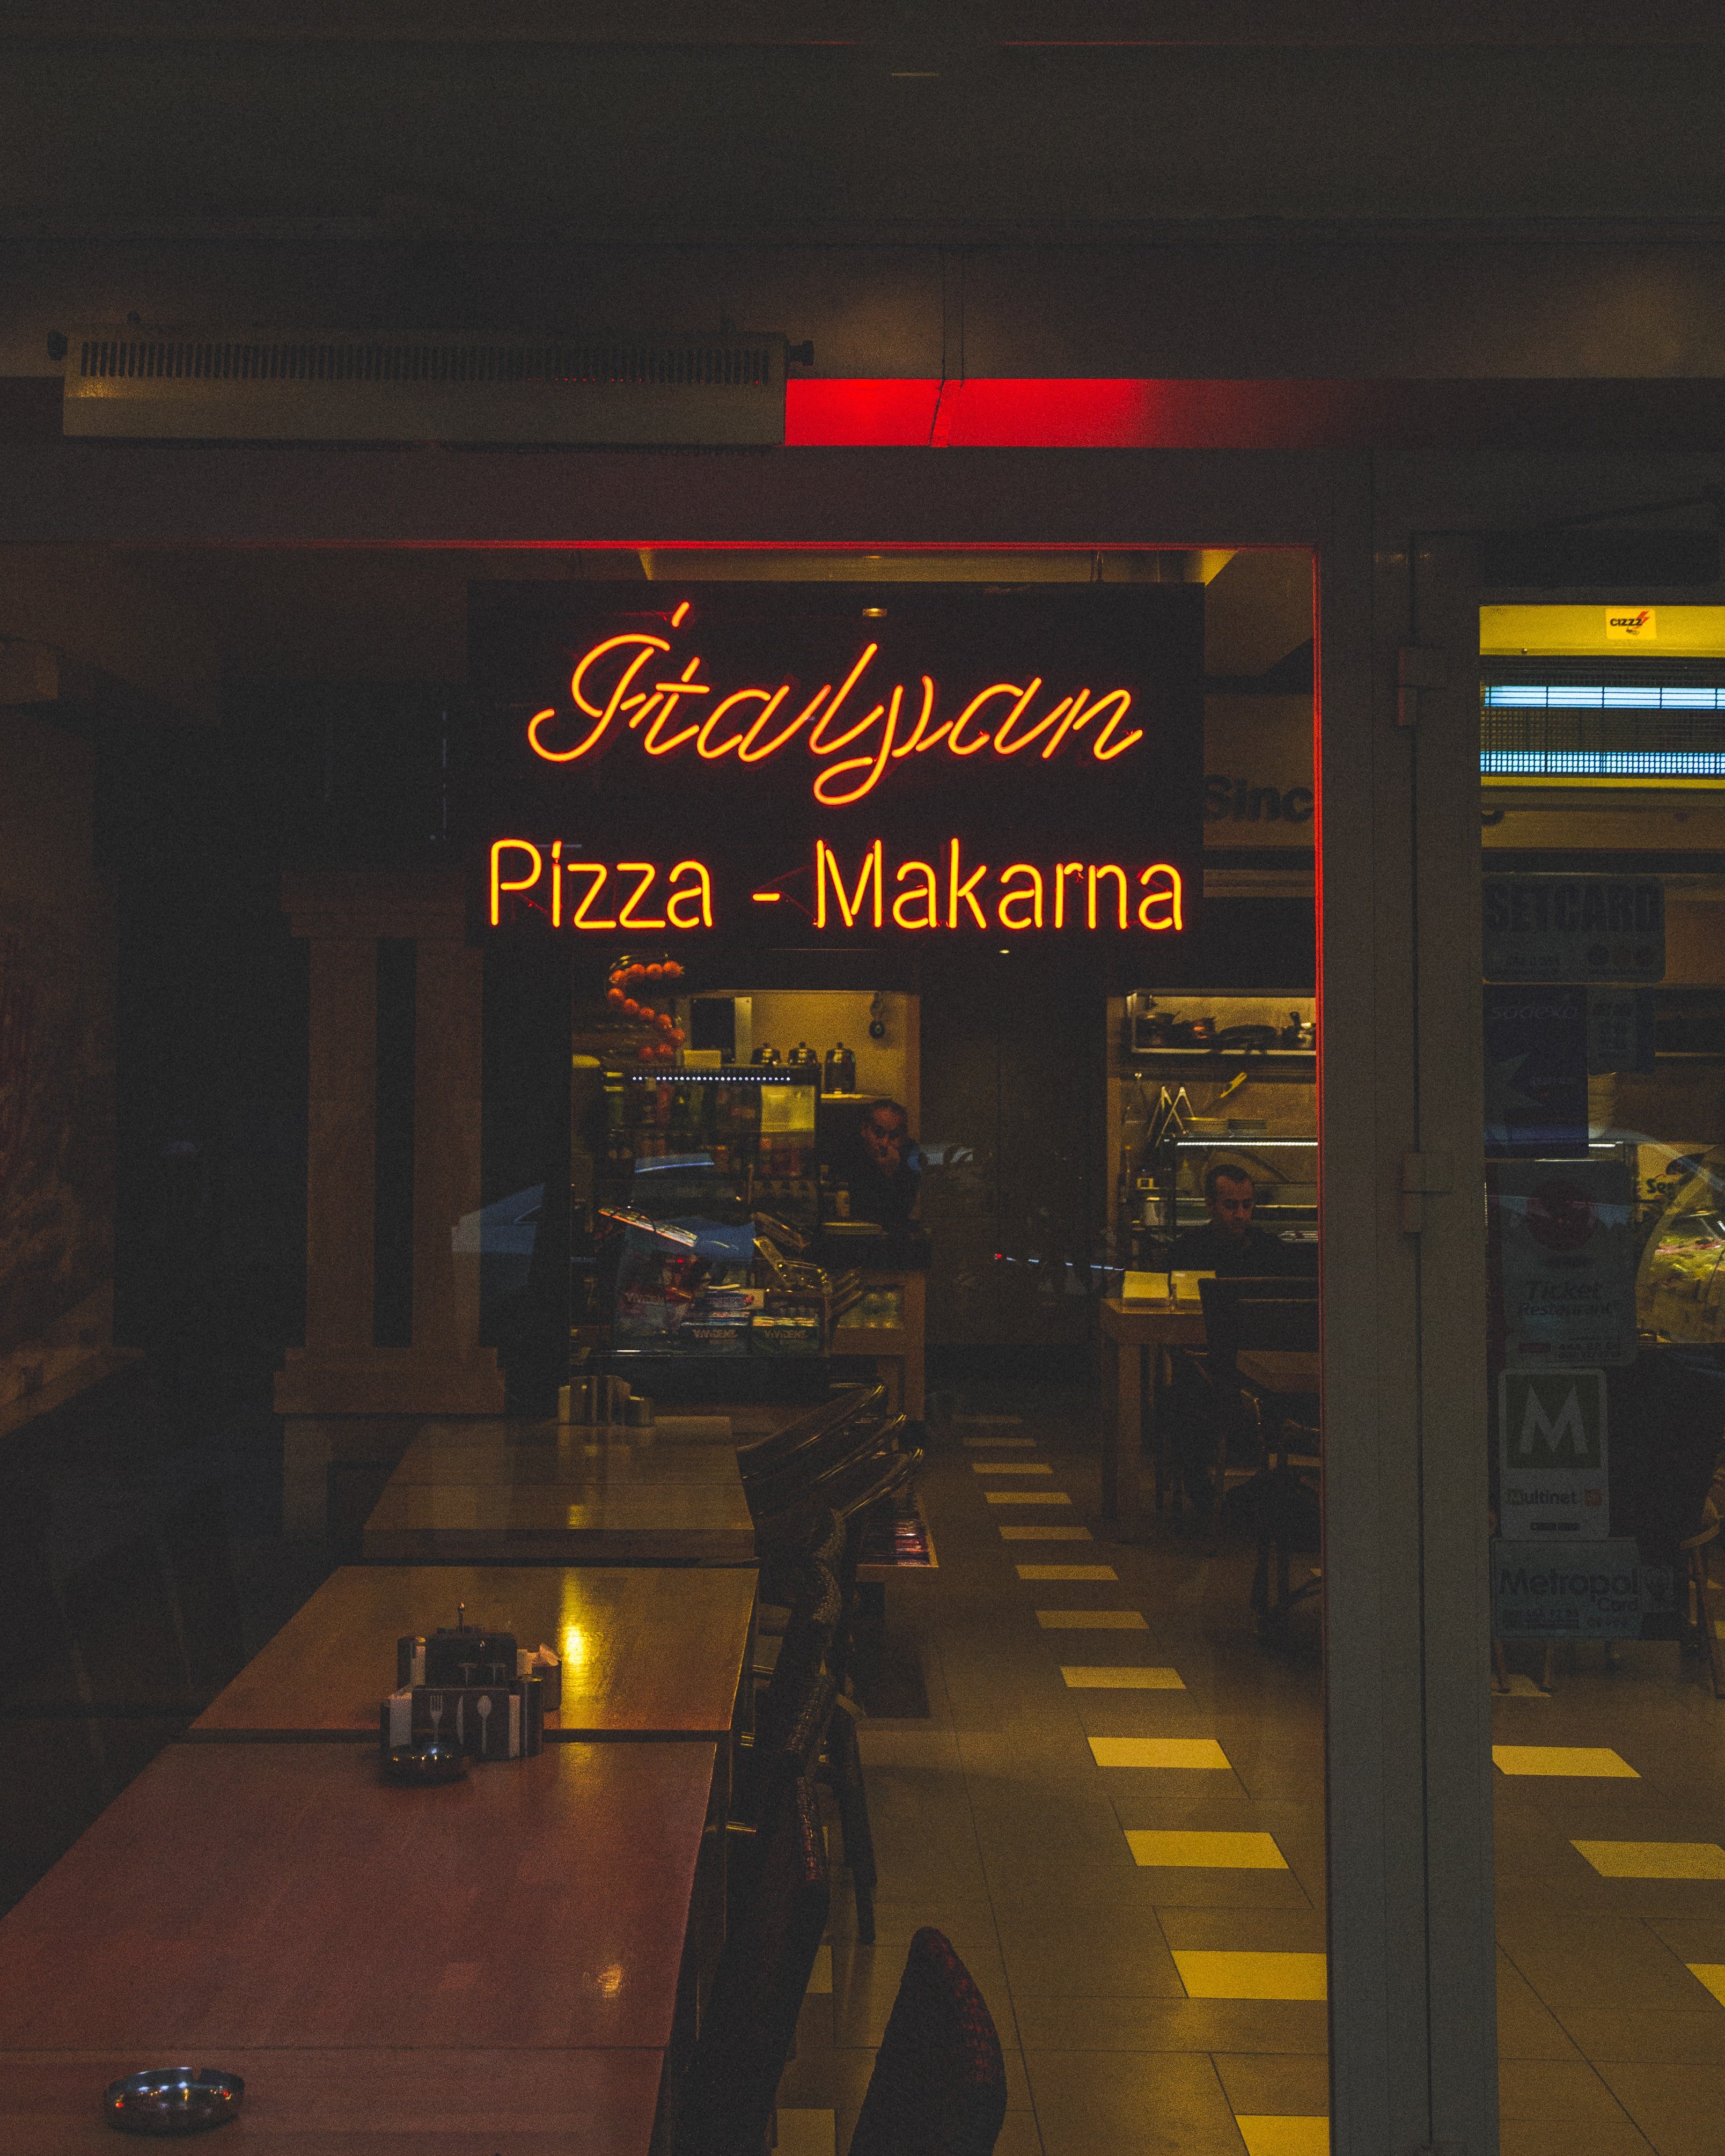 Arnold realized that the pizzeria must have once been successful based on its interior design. | Source: Pexels